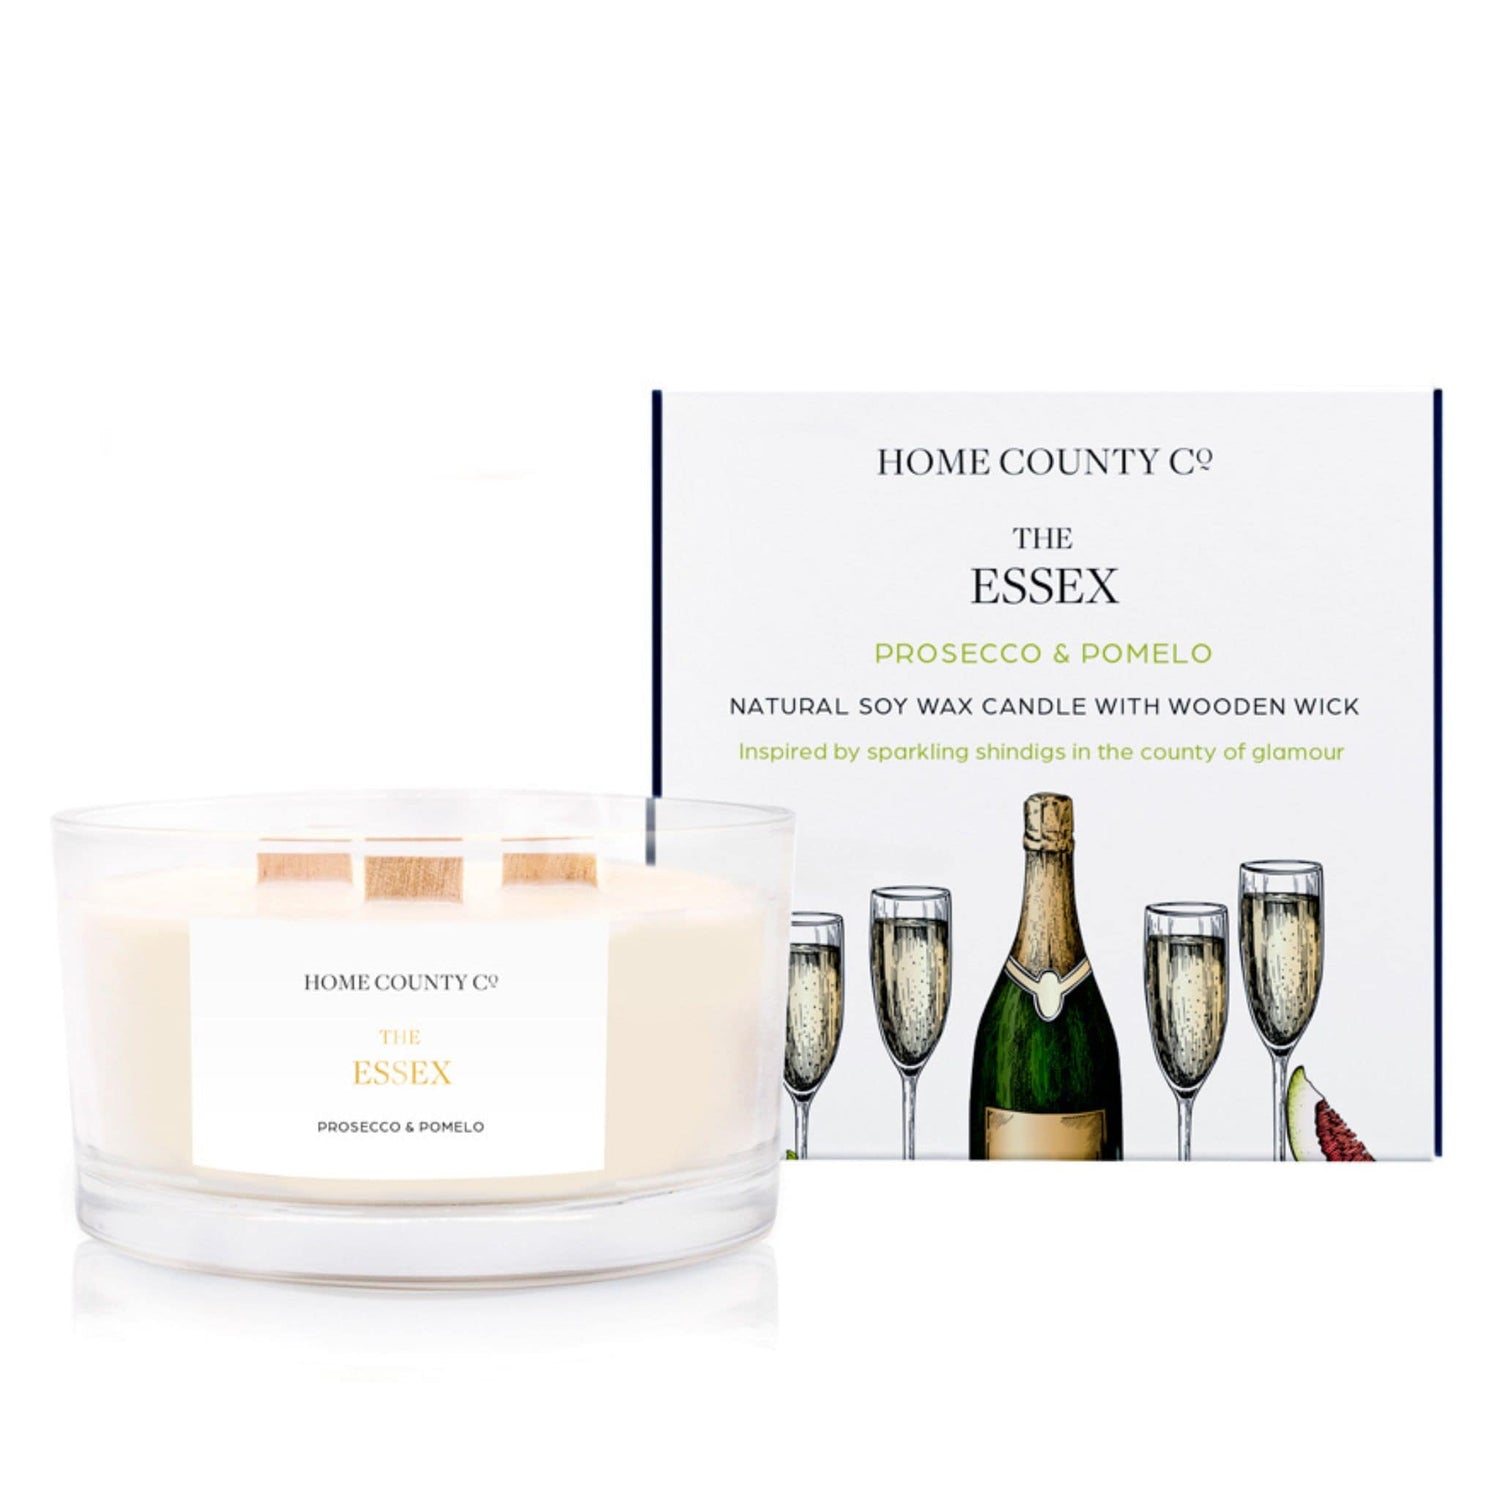 A Prosecco and pomelo scented 3 wick candle from the Home County Co. is shown next to its eco-friendly candle packaging box. 